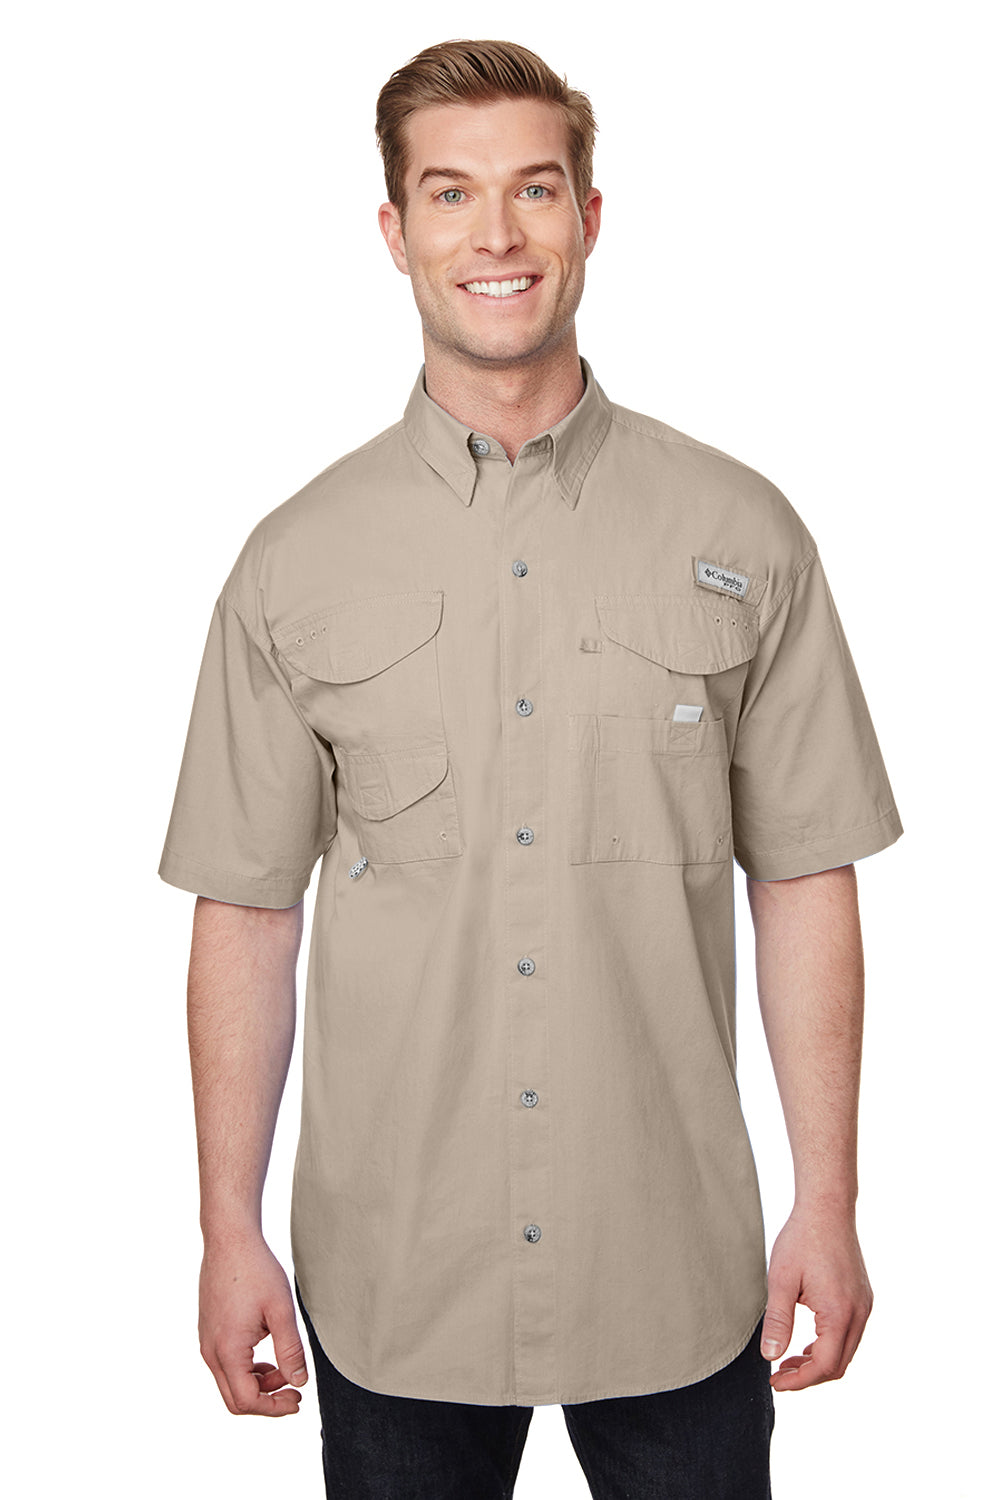 Columbia 7130 Mens Bonehead Short Sleeve Button Down Shirt w/ Double Pockets Fossil Brown Front